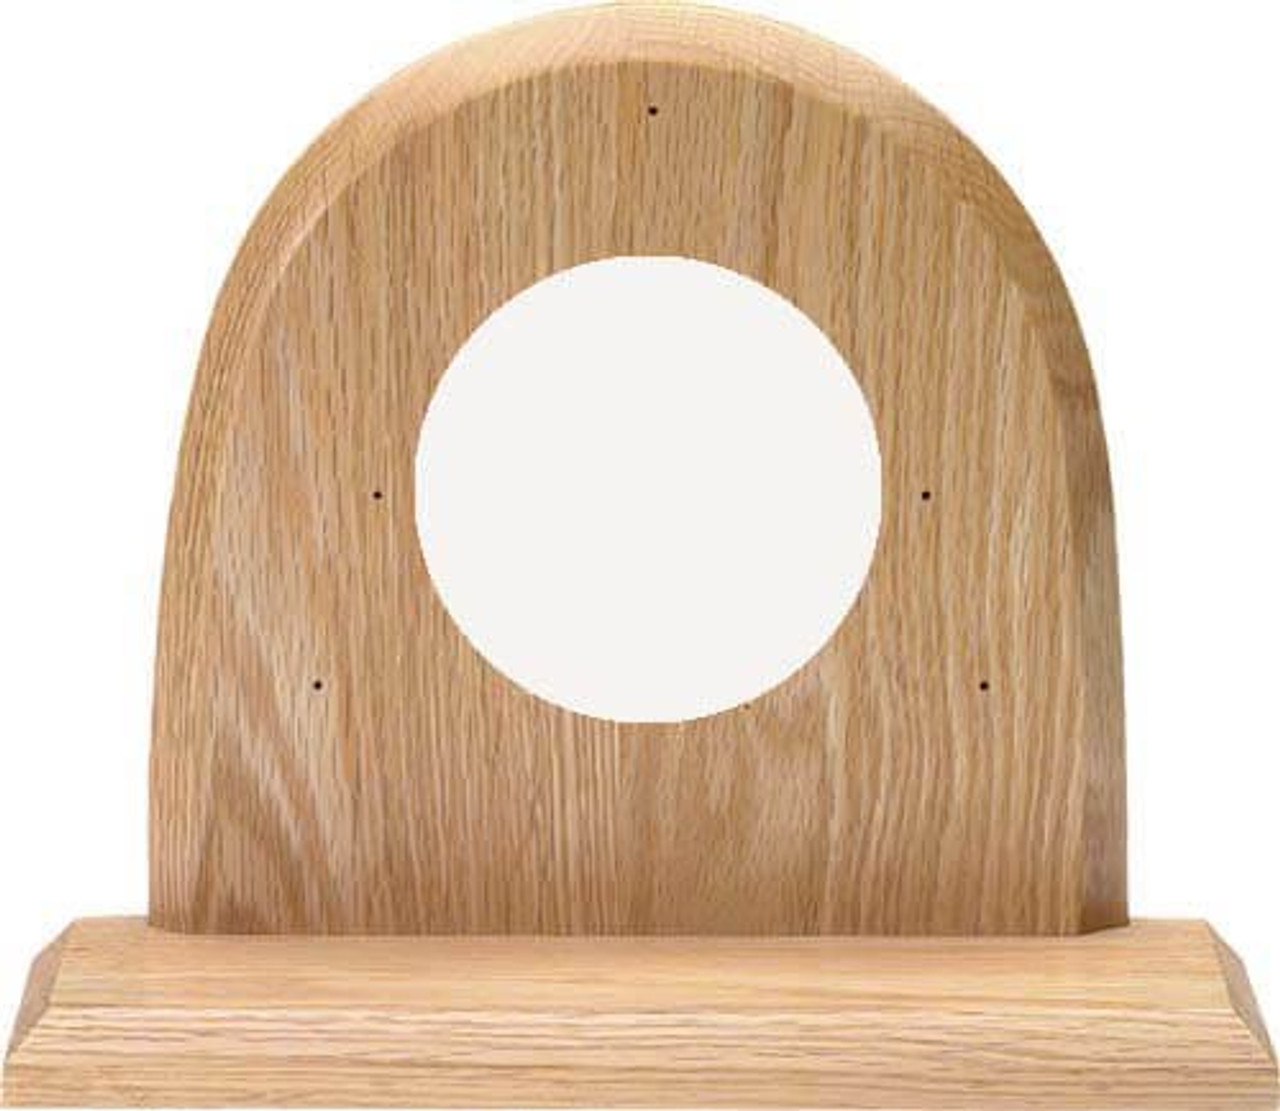 Oak Mantle Mount for Comfortminder Humidity and Thermometer Comfort Reading Instrument